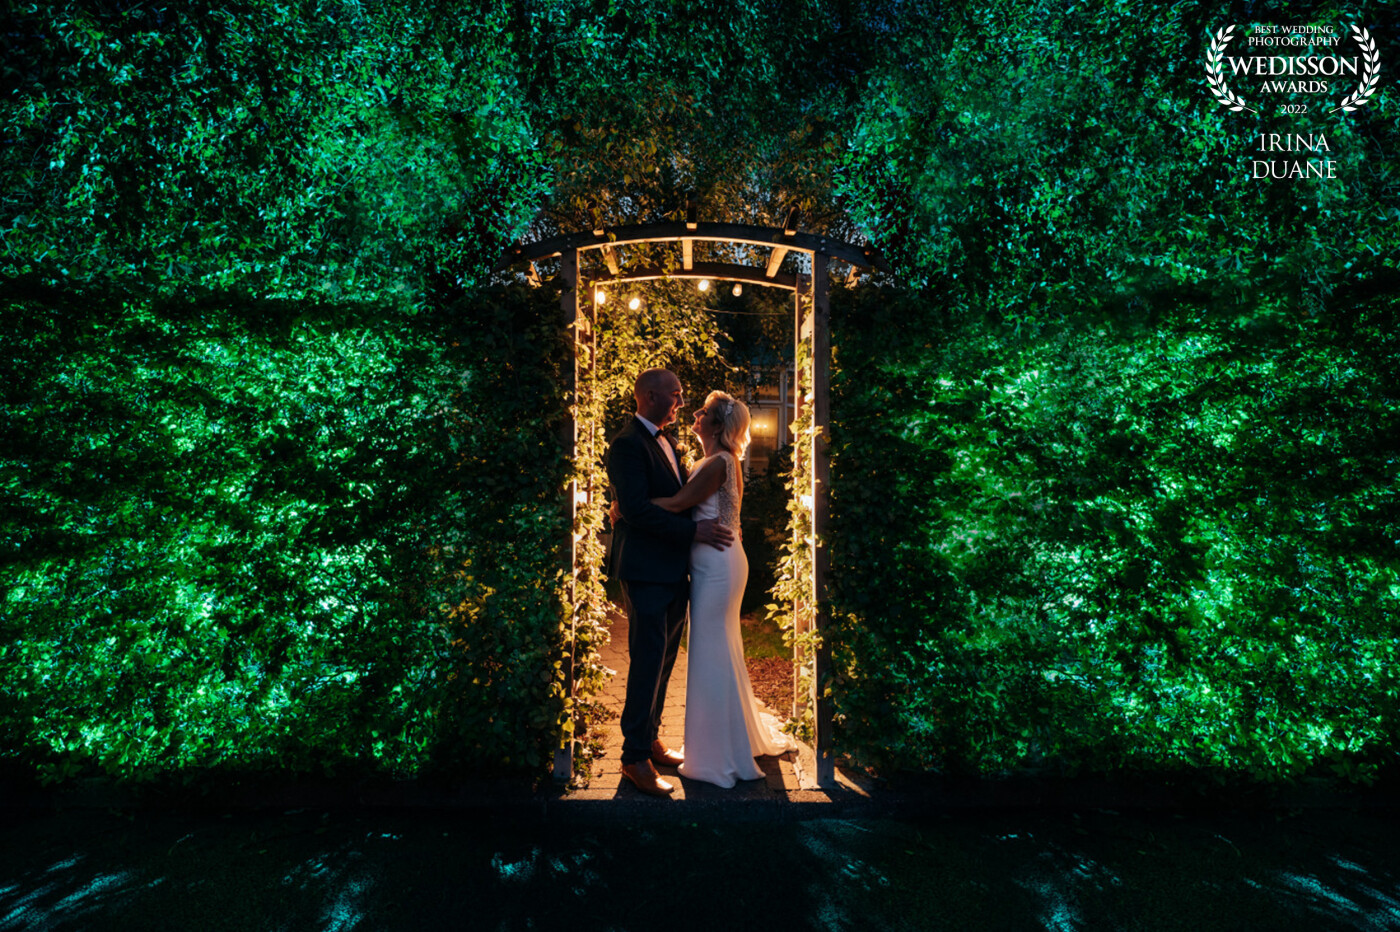 This image came at the end of the day at the Park Hotel Dungarvan, Ireland.  Godox ad200 with MagMod Sphere and green MagGel behind the bushes at full power. Godox v860iii with full CTO behind the couple for a warm back light.